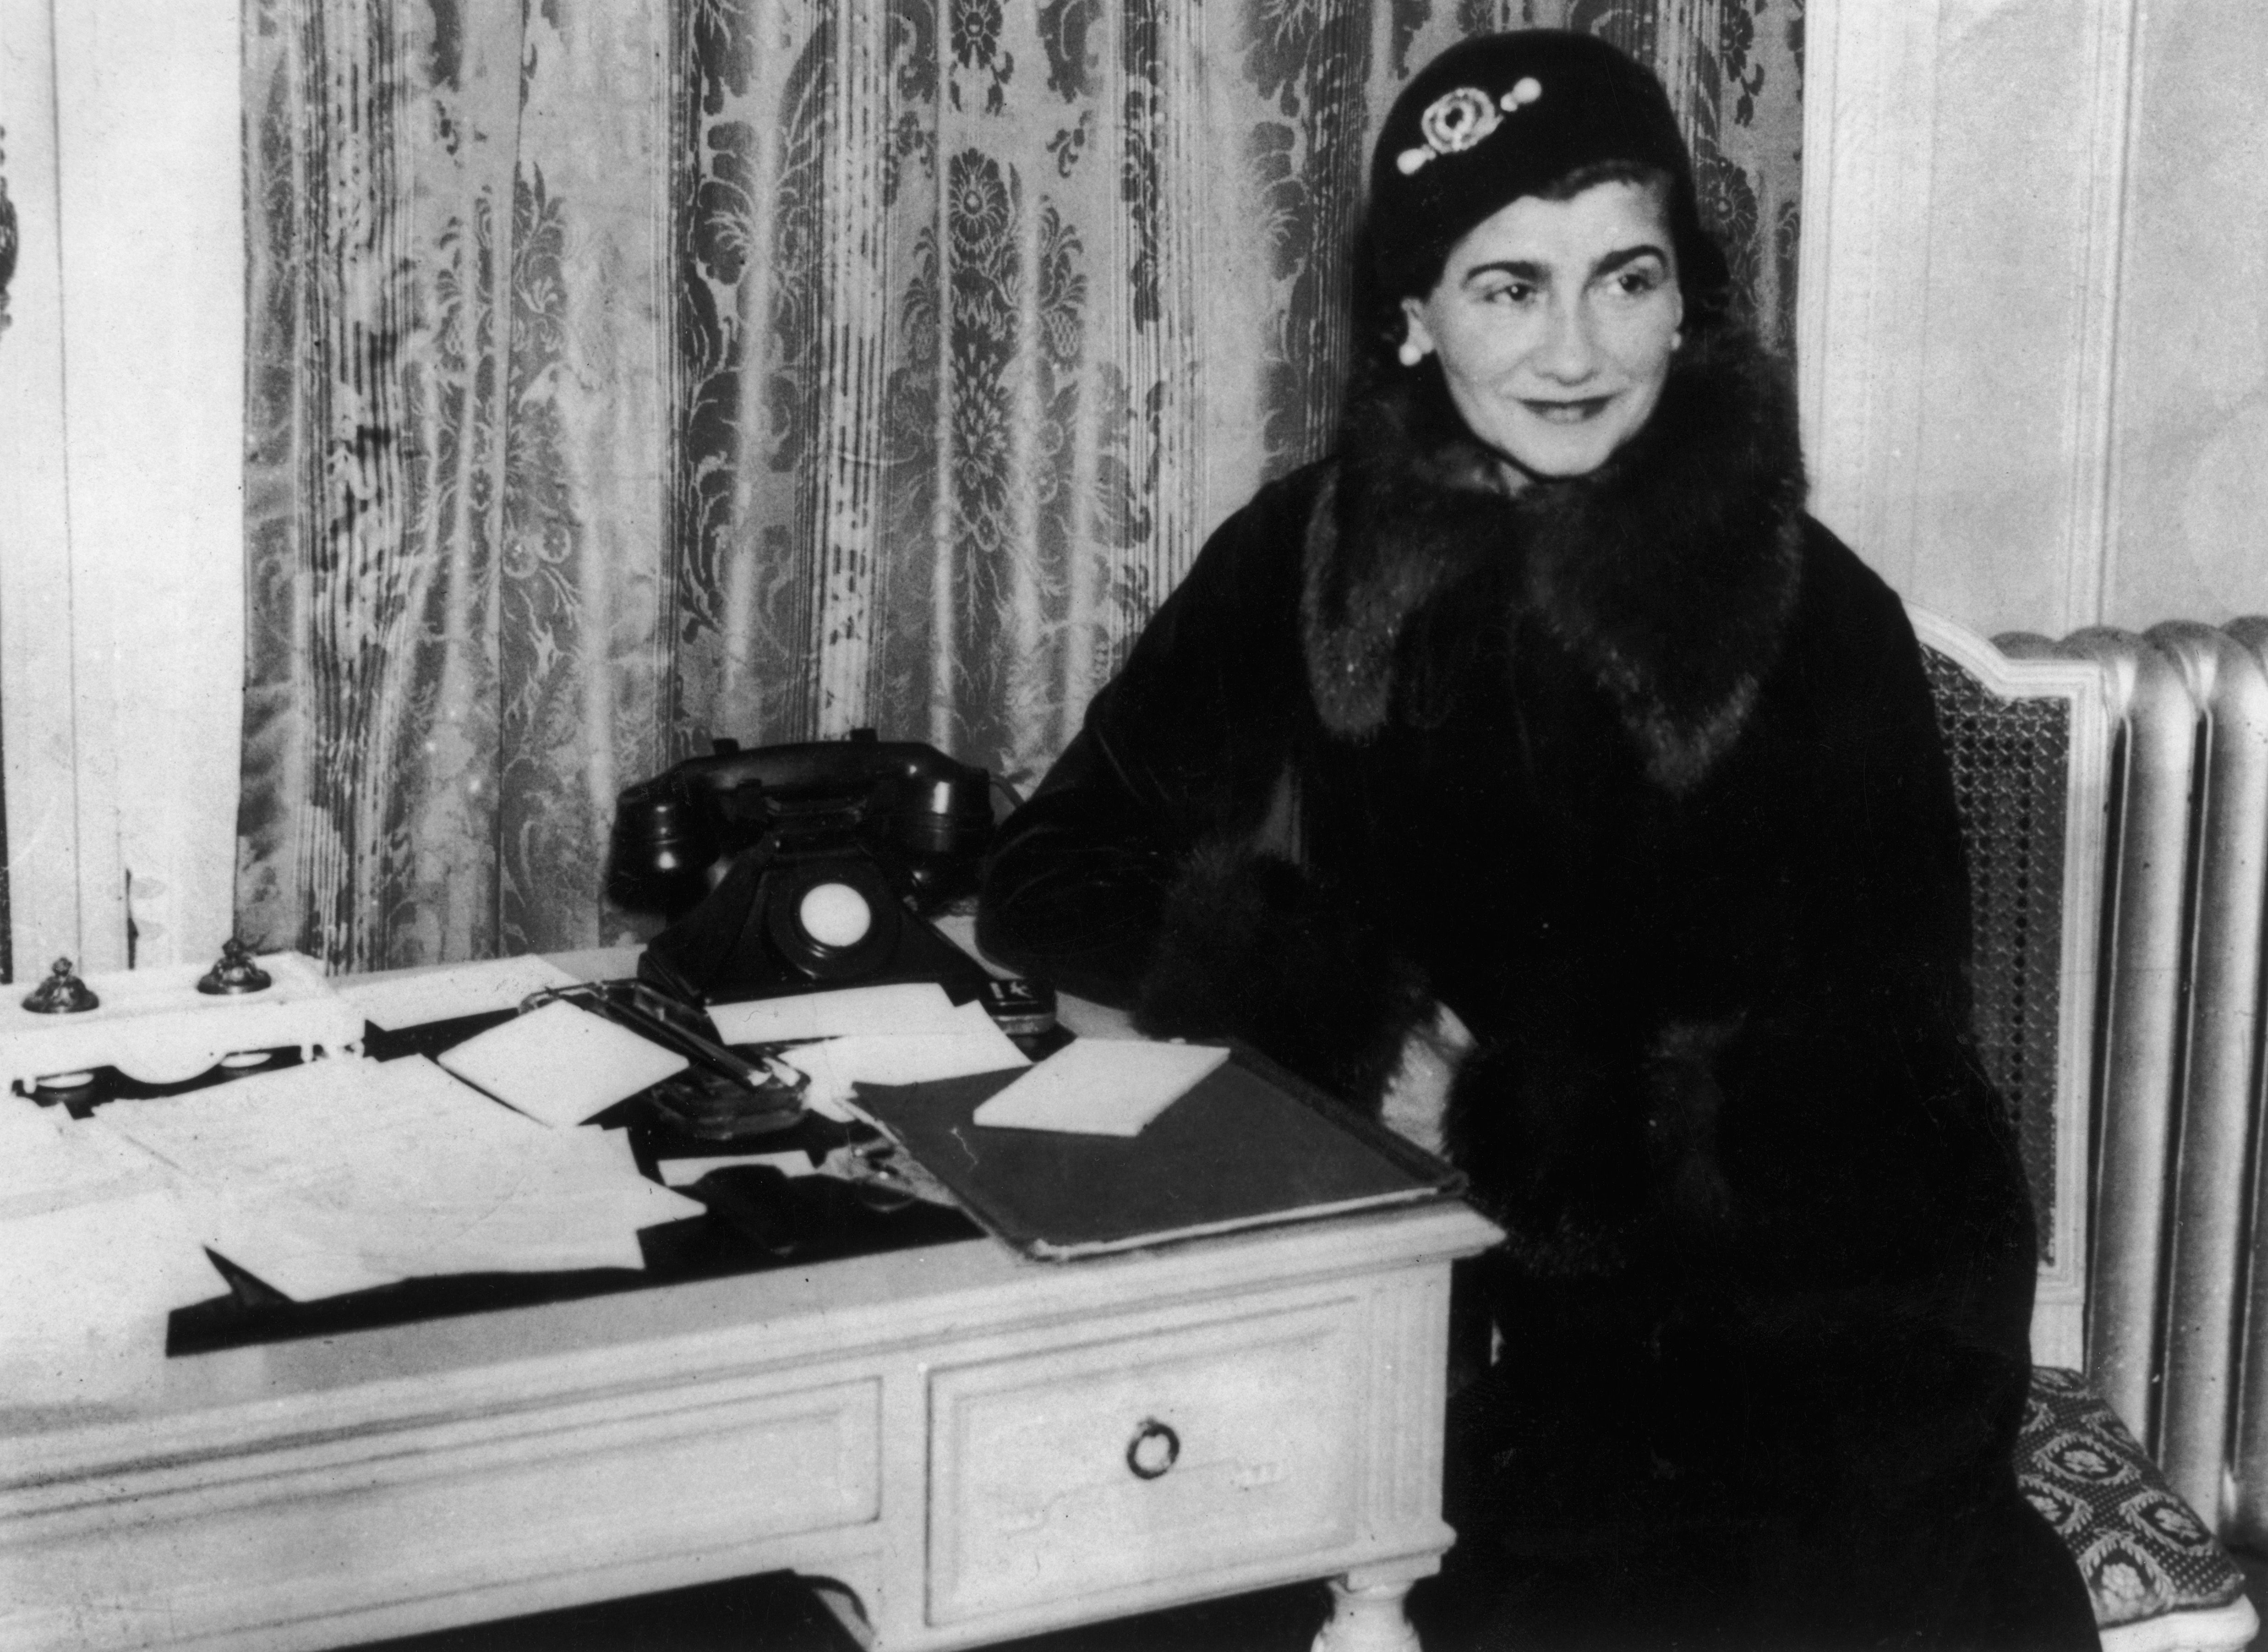 Coco Chanel's best quotes